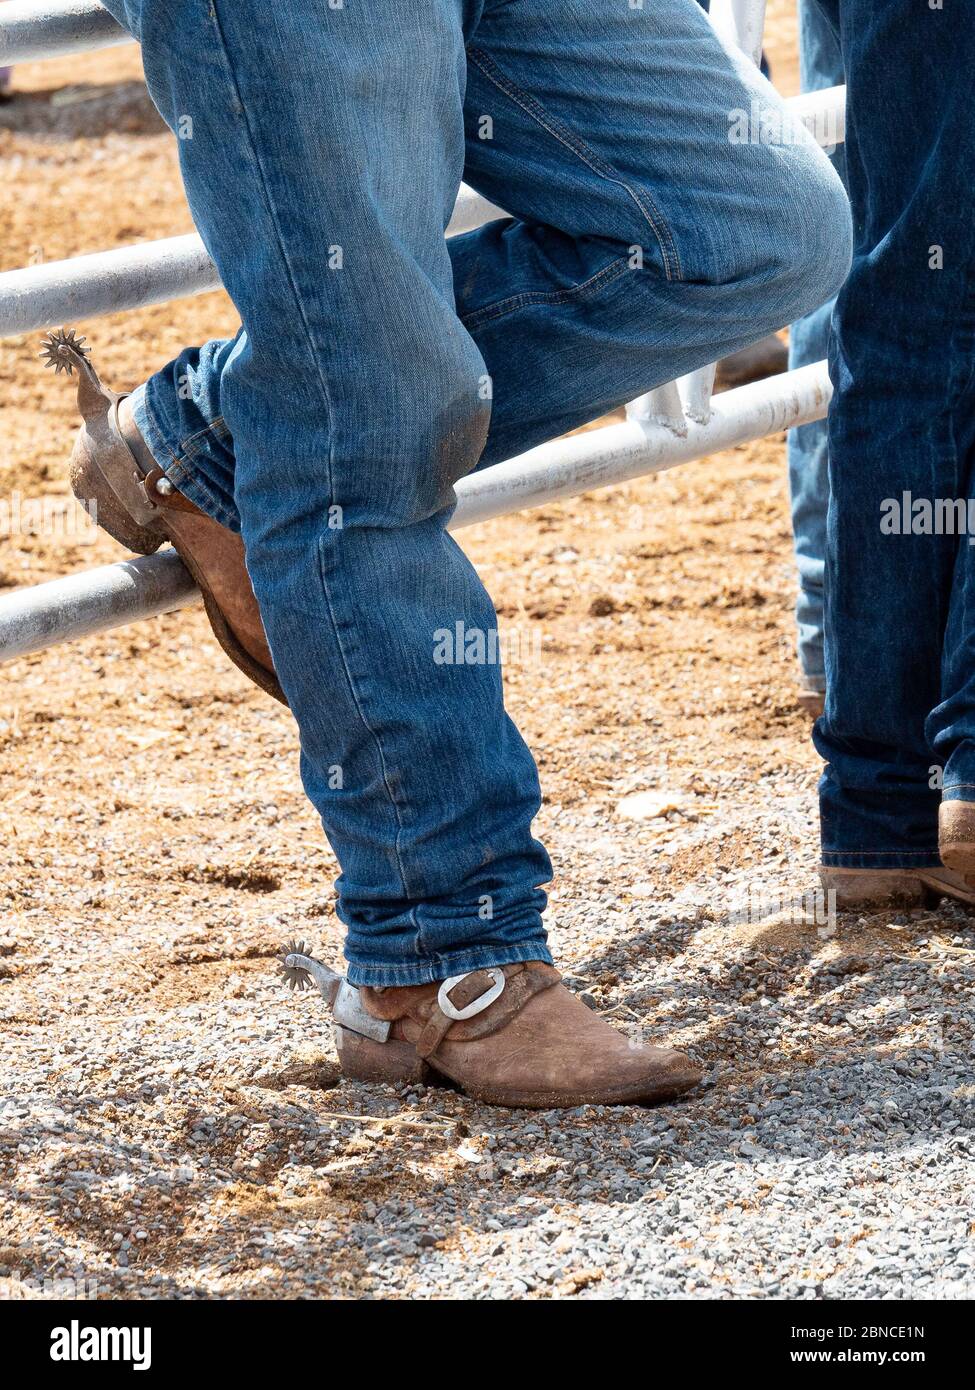 Cowboy boots with spurs Stock Photo - Alamy